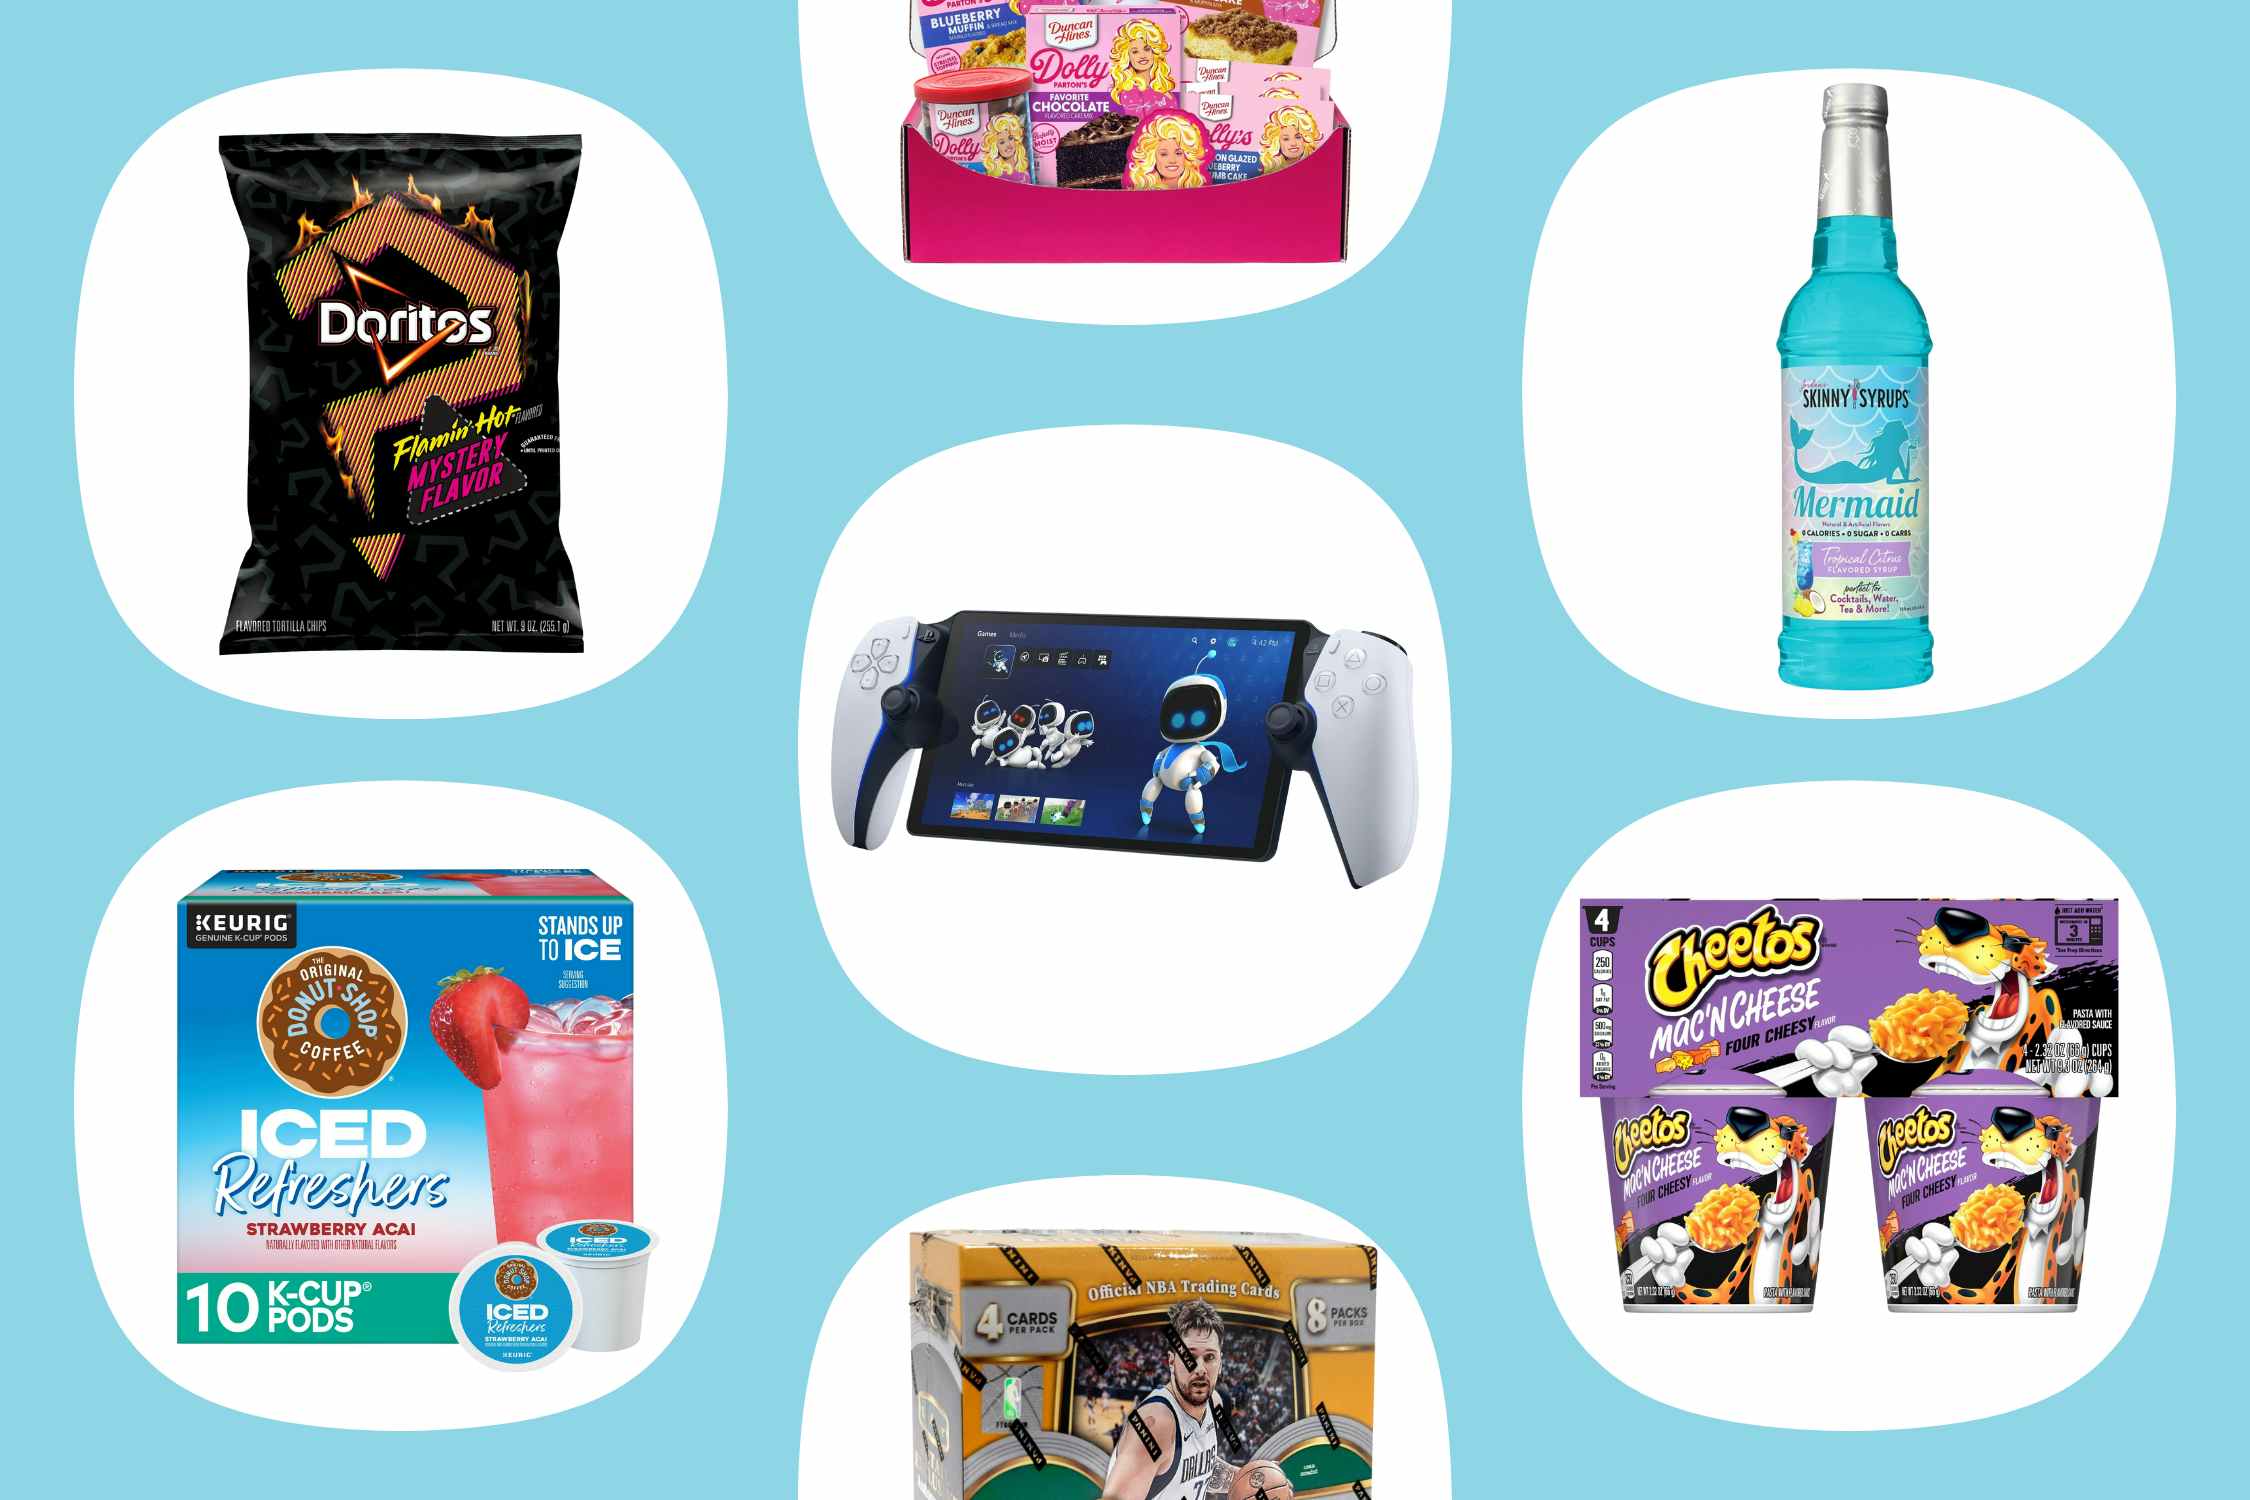 Today at Noon ET: Walmart+ Members Get Early Access to New Products